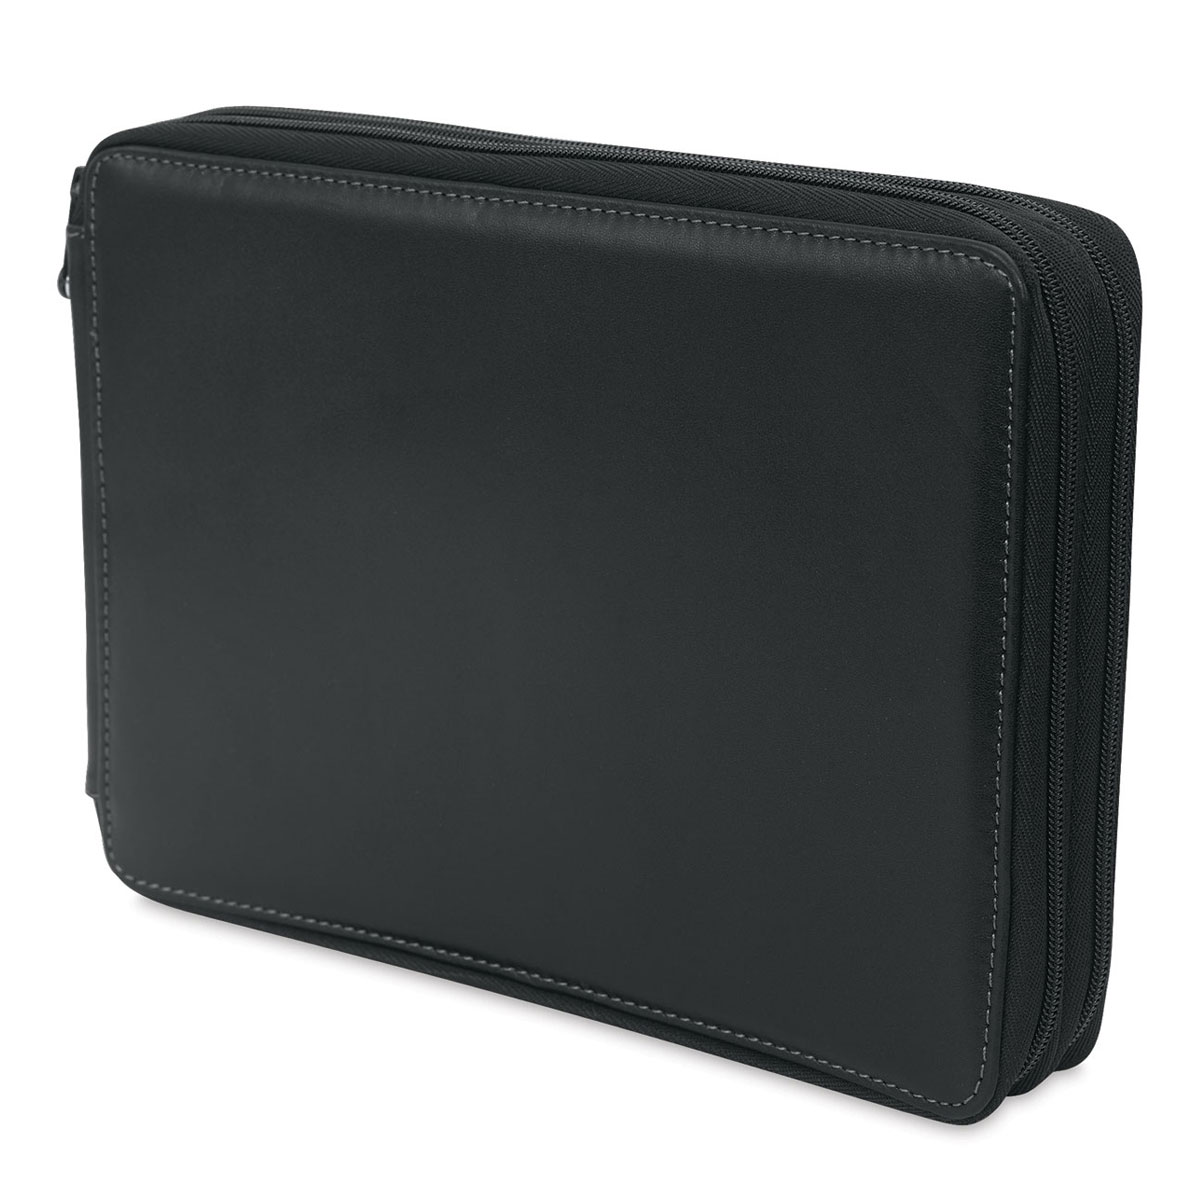 Speedball Classic Leather Pencil Case - Smooth Black, or 120 Pencils